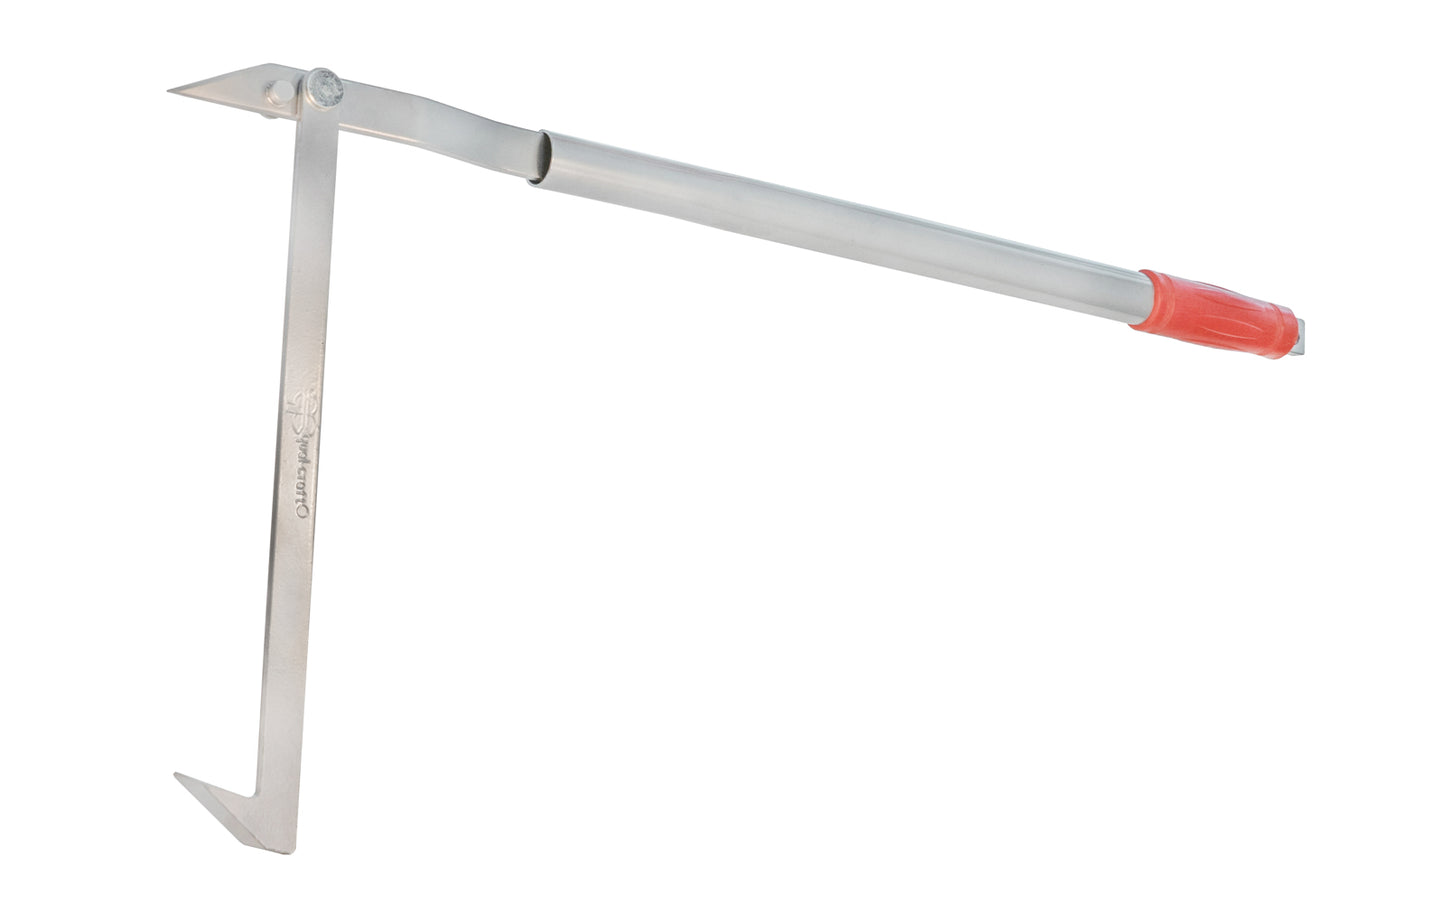 This Big Pee-Vee provides pushing & pulling power to move the sill plate on new construction walls & assures proper alignment. It is also more precise than hammering. 14" distance between points. 29" overall length. Pulls partitions together for nailing. 012643026101. Qual-Craft Pee Vee Model 2610.  012643026101